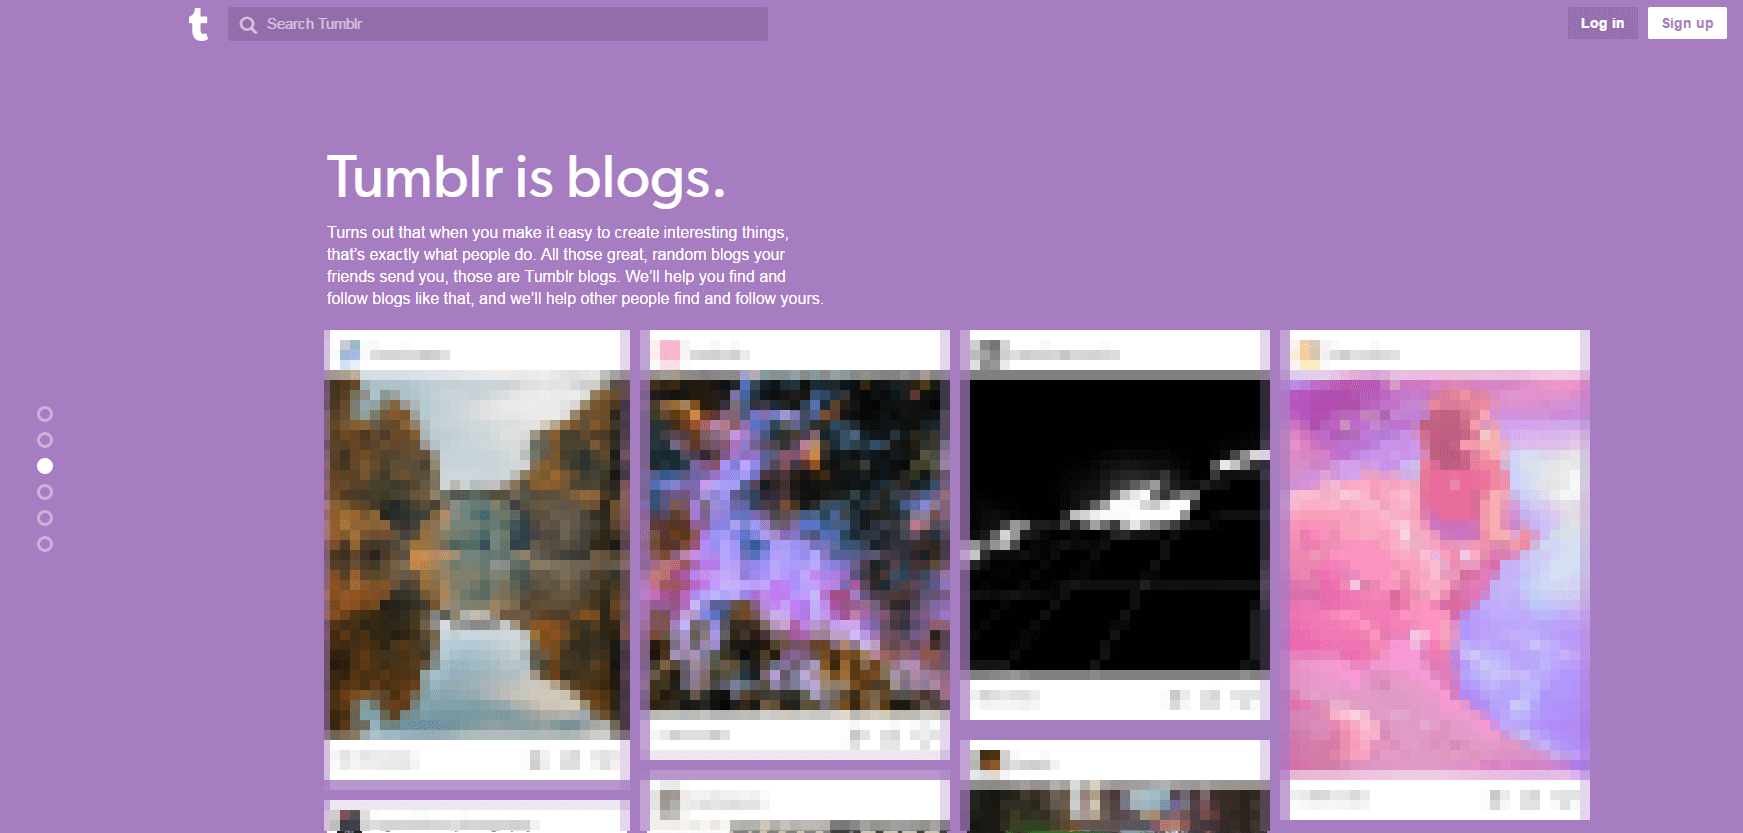 Tumblr homepage – a brief introduction